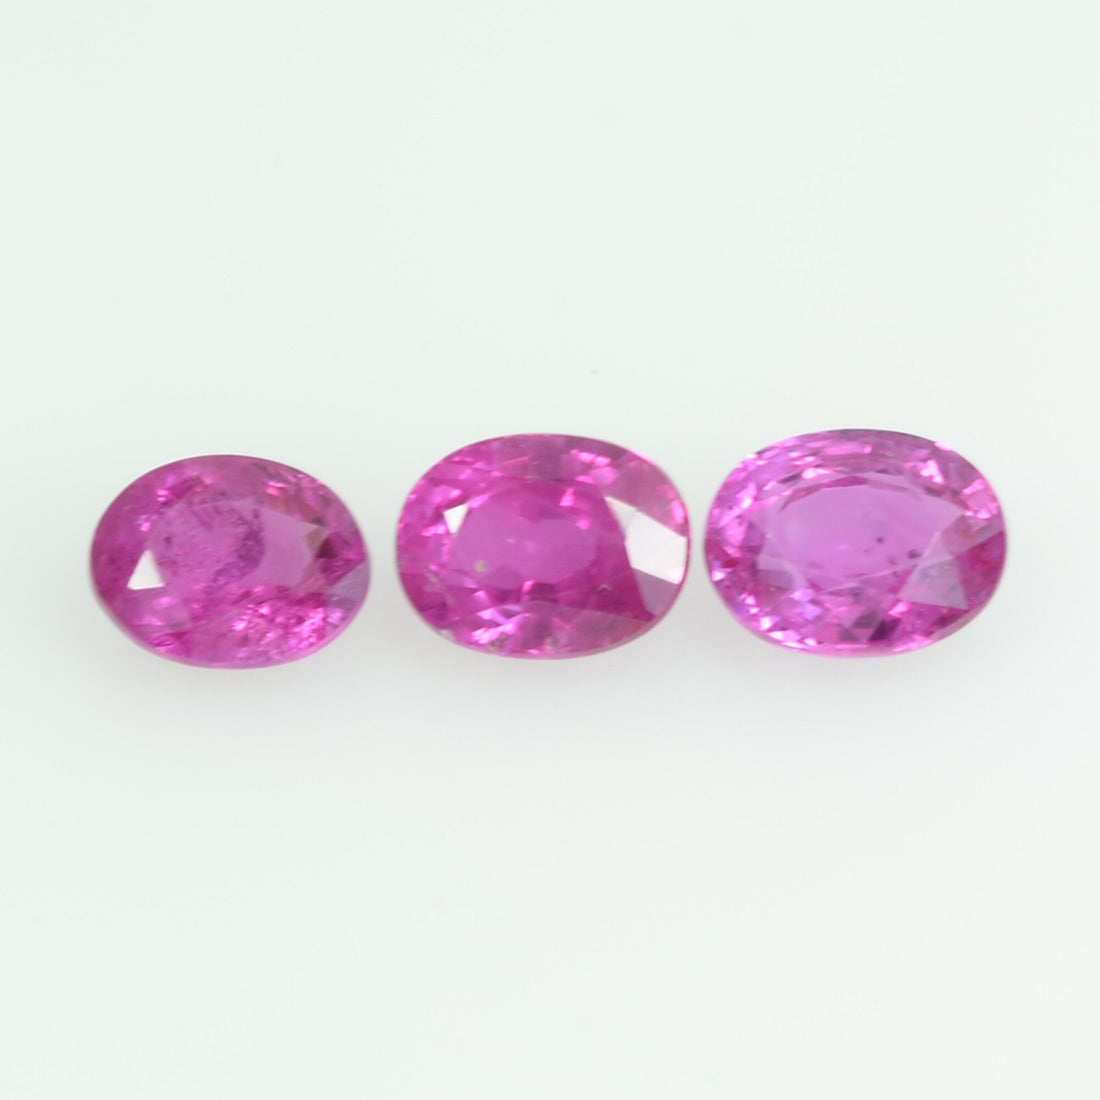 4.5x3.5 mm Natural Pink Sapphire Loose Gemstone oval Cut